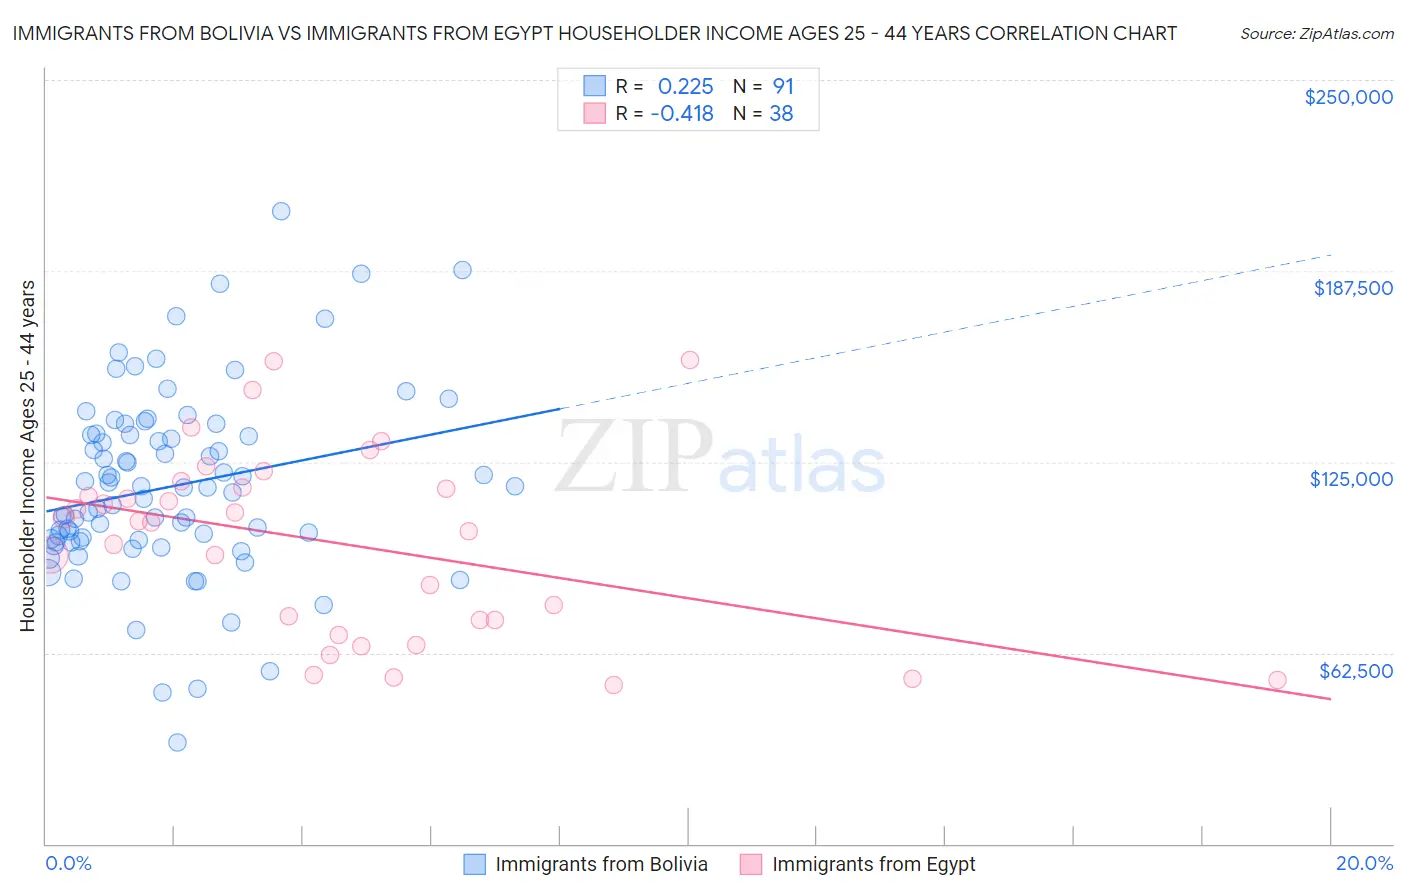 Immigrants from Bolivia vs Immigrants from Egypt Householder Income Ages 25 - 44 years